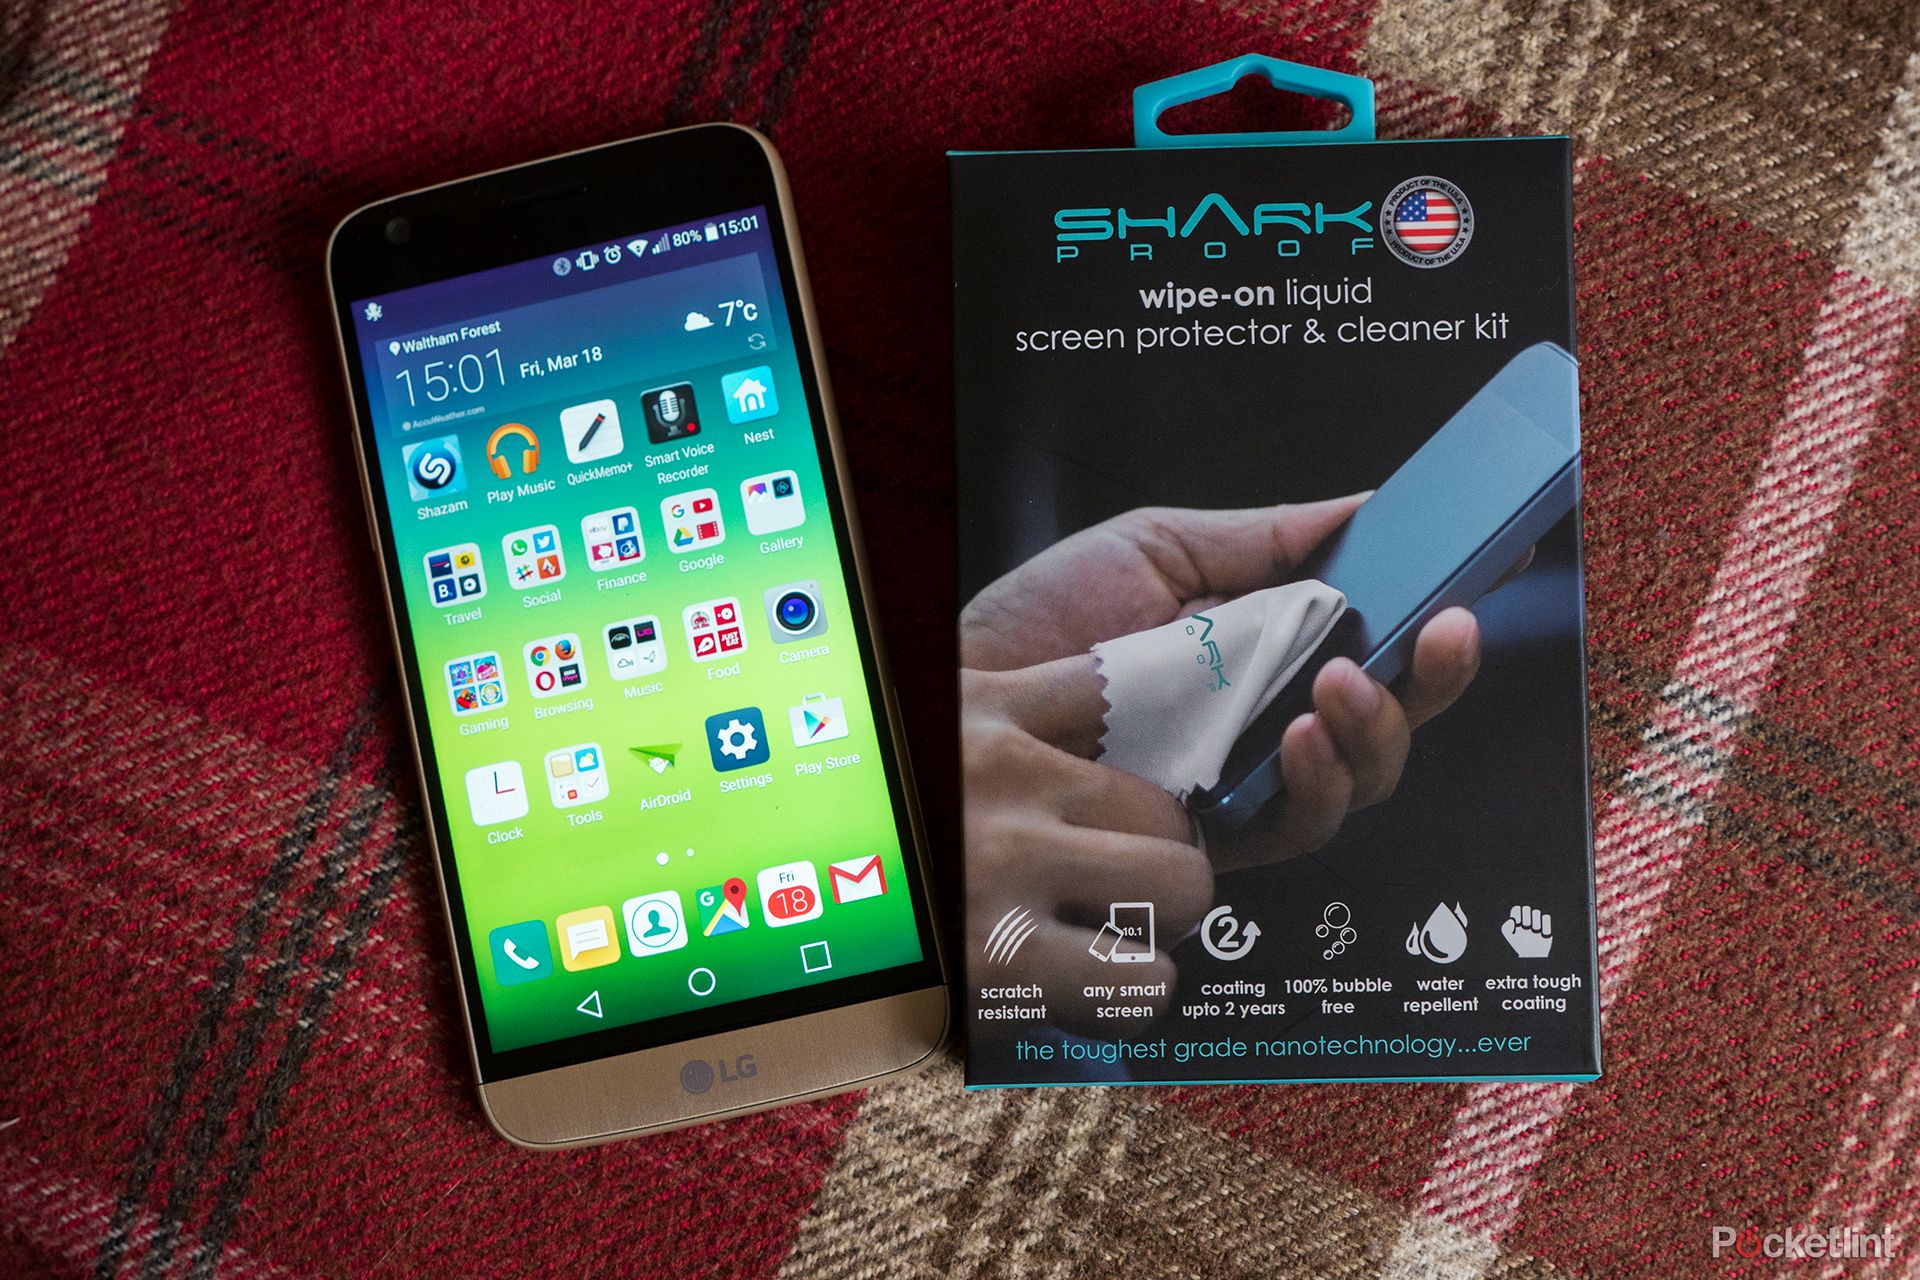 shark proof liquid screen protector works for any screen even curved phones image 1